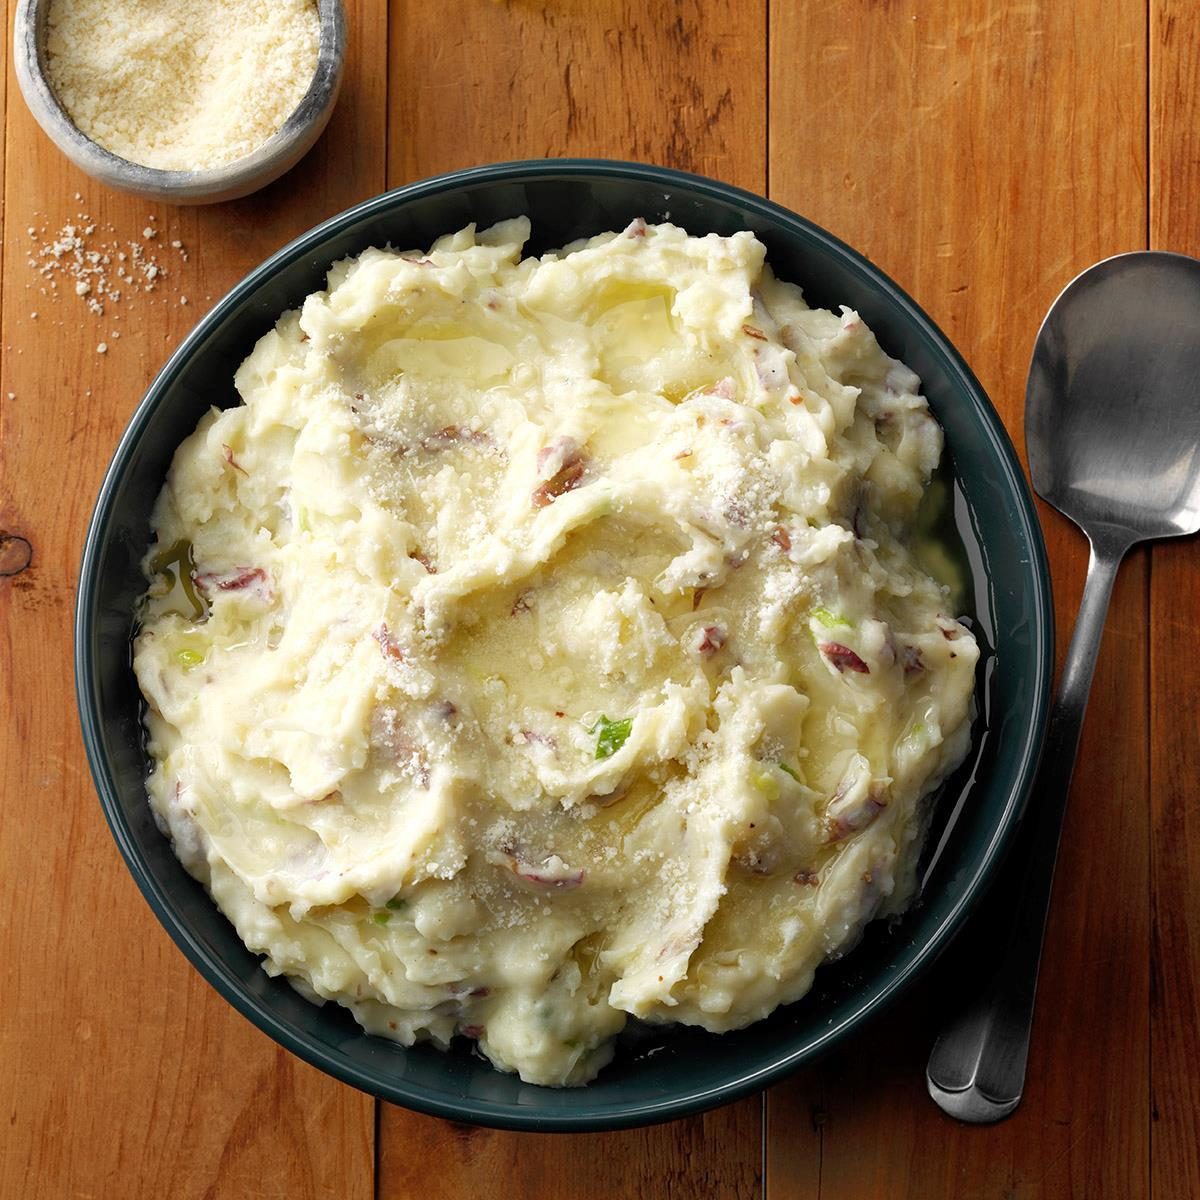 <p>The Pioneer Woman makes <a href="https://www.tasteofhome.com/recipes/buttery-mashed-potatoes/">mashed potatoes</a> a few days before Thanksgiving and suggests that you do the same. Grab your <a href="https://www.walmart.com/ip/The-Pioneer-Woman-Frontier-Collection-4-Piece-Kitchen-Tool-Set-Skimmer-Tongs-Masher-Tenderizer-Teal/486779138" rel="noopener noreferrer">Pioneer Woman masher</a>, mash your potatoes, mix with the creamy ingredients and store in a covered dish in the fridge for up to two days. On Thanksgiving, remove the dish 45 minutes before it needs to go into the oven and bake at 350<em>°</em>F for about 30 minutes.</p>